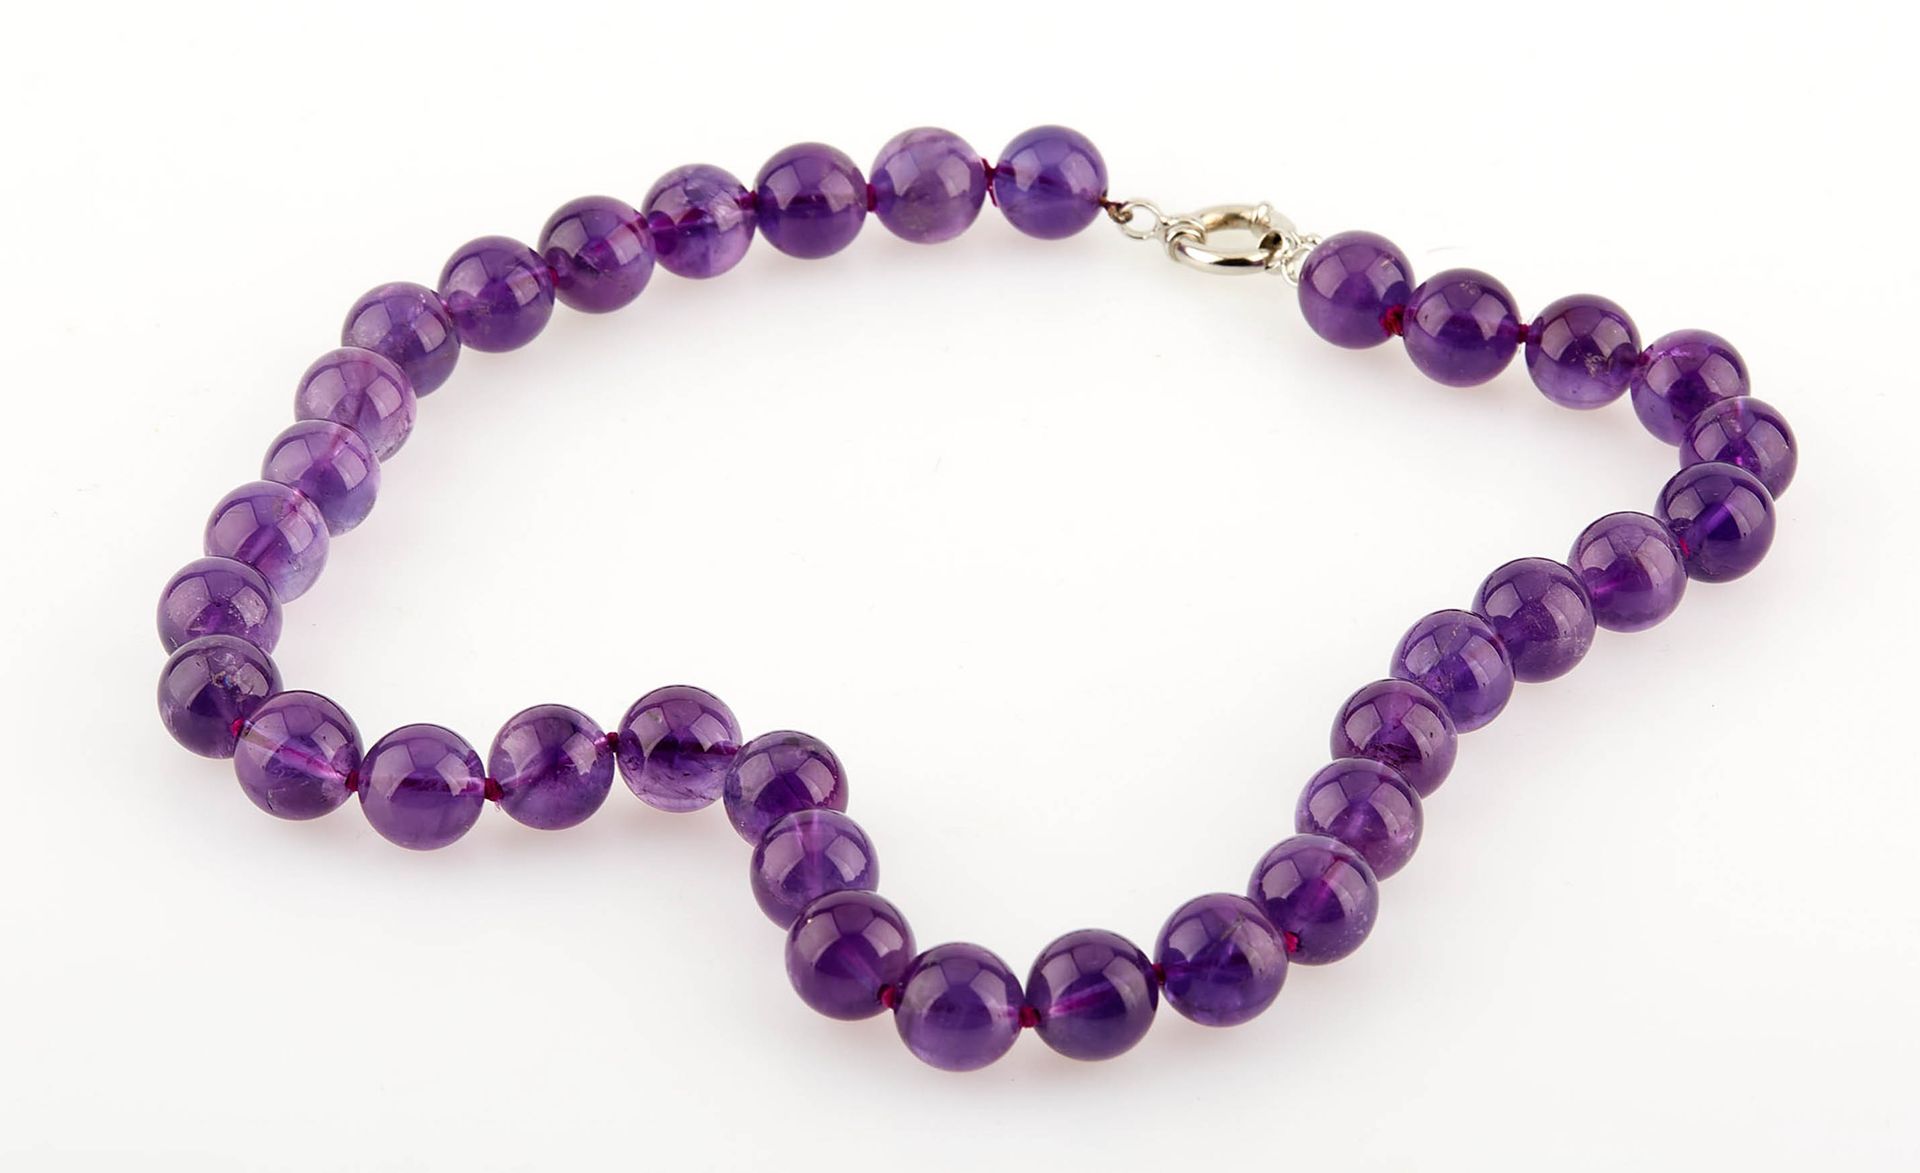 Null Necklace of thirty-four balls of amethysts. Silver clasp. Length : 46 cm.